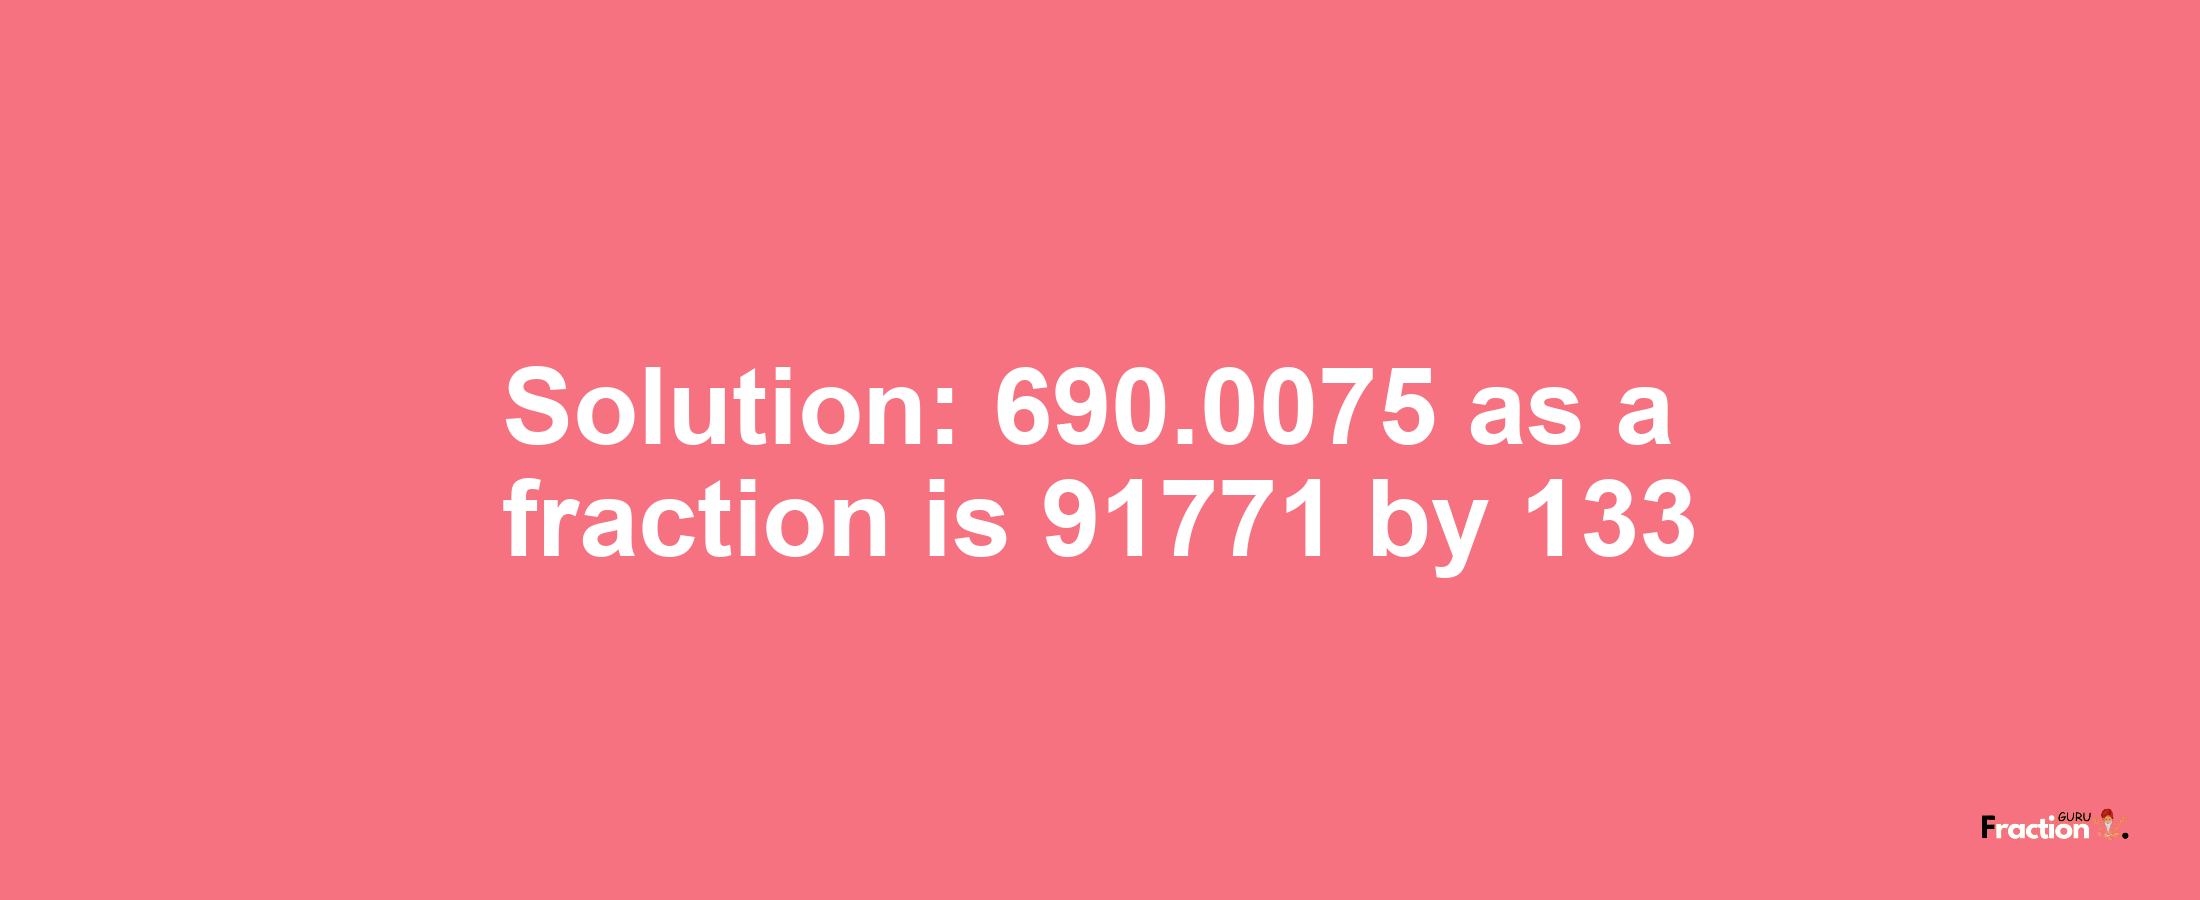 Solution:690.0075 as a fraction is 91771/133